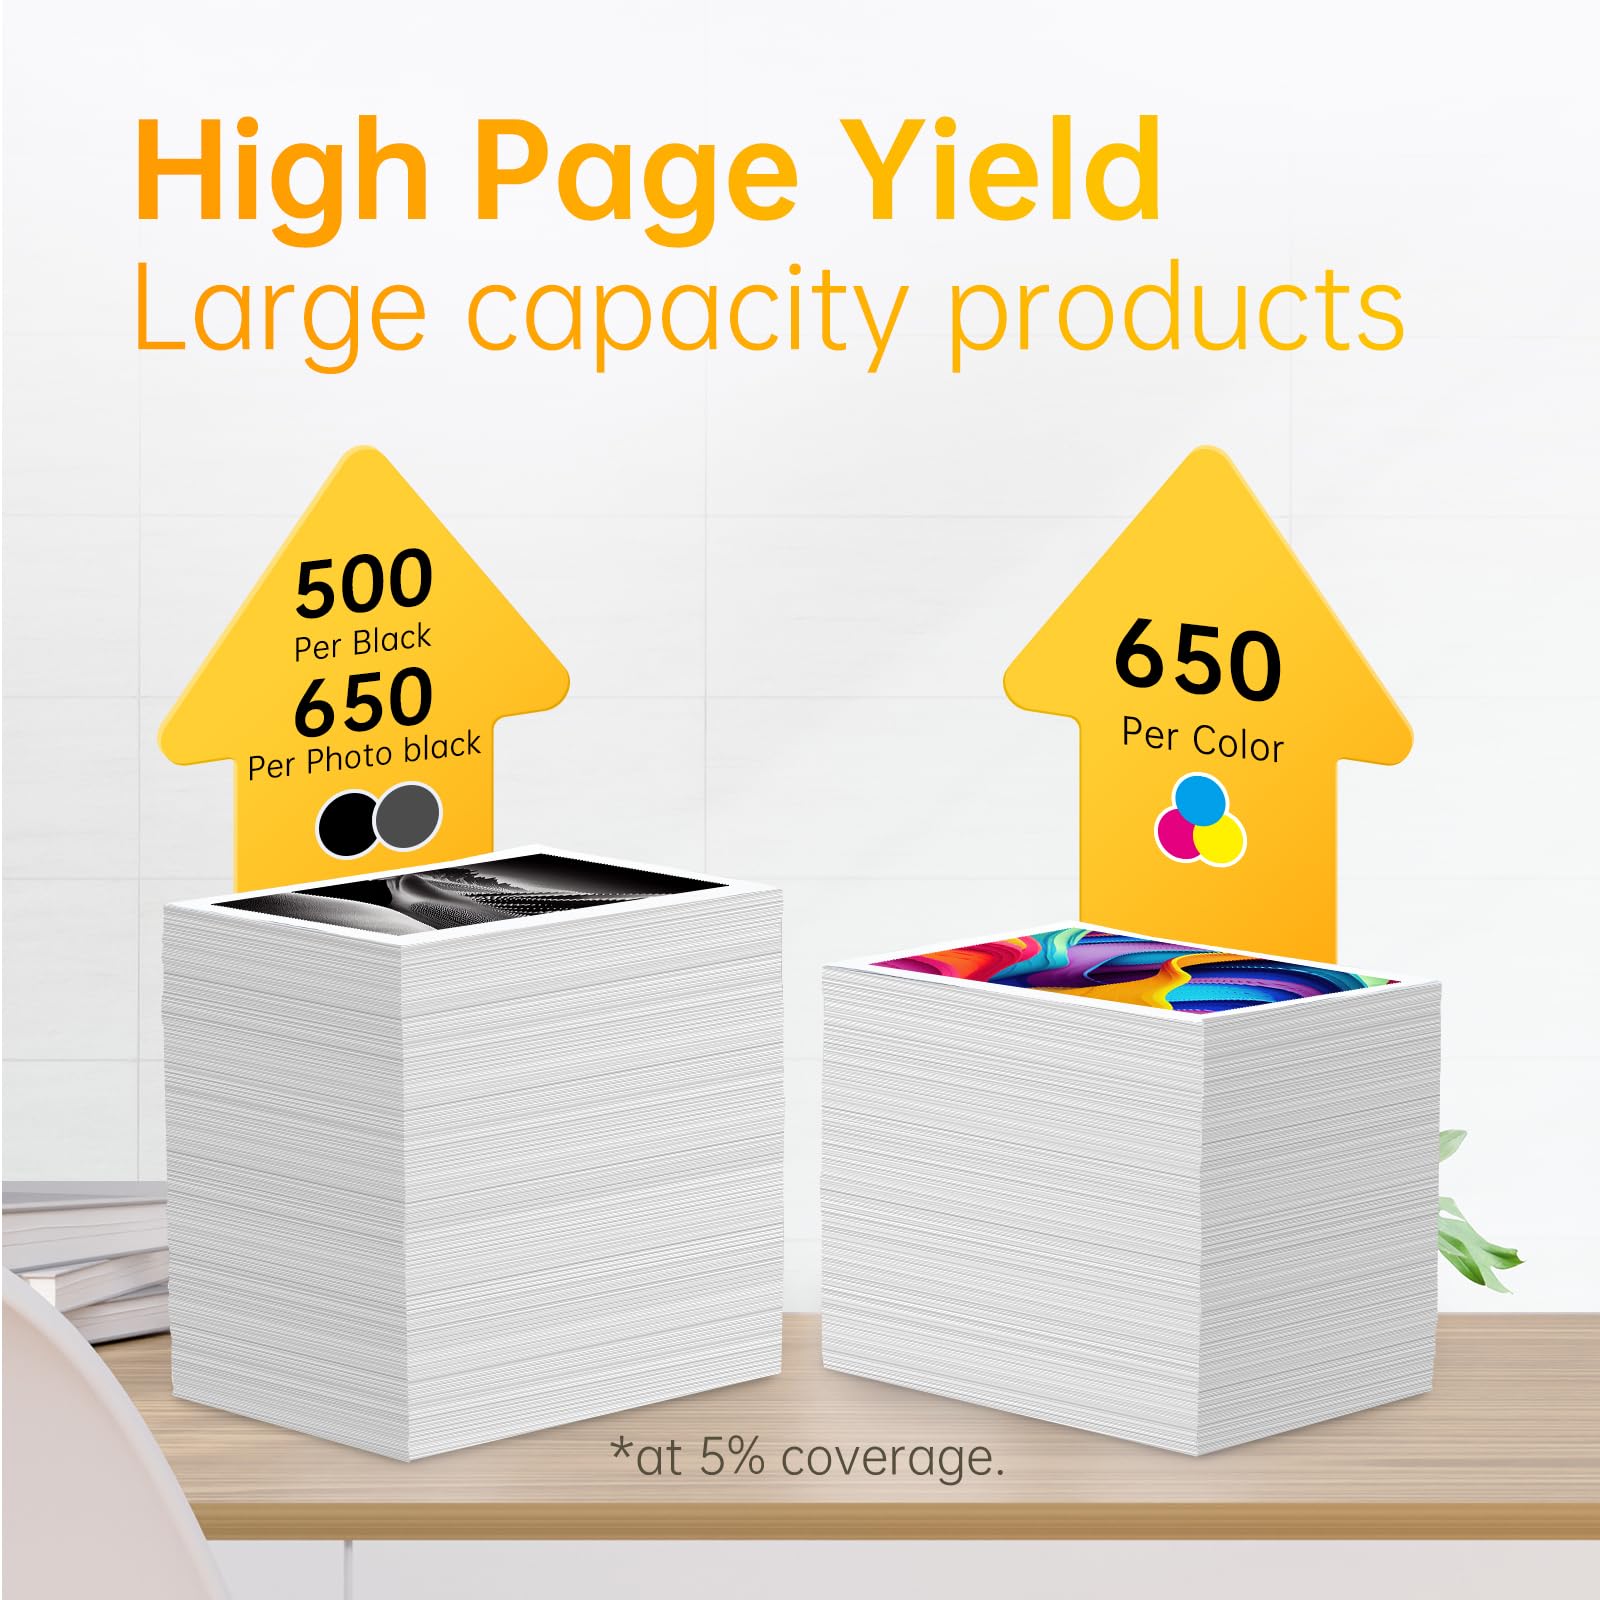 High page yield with large capacity products: 500 pages per black, 650 pages per photo black and color